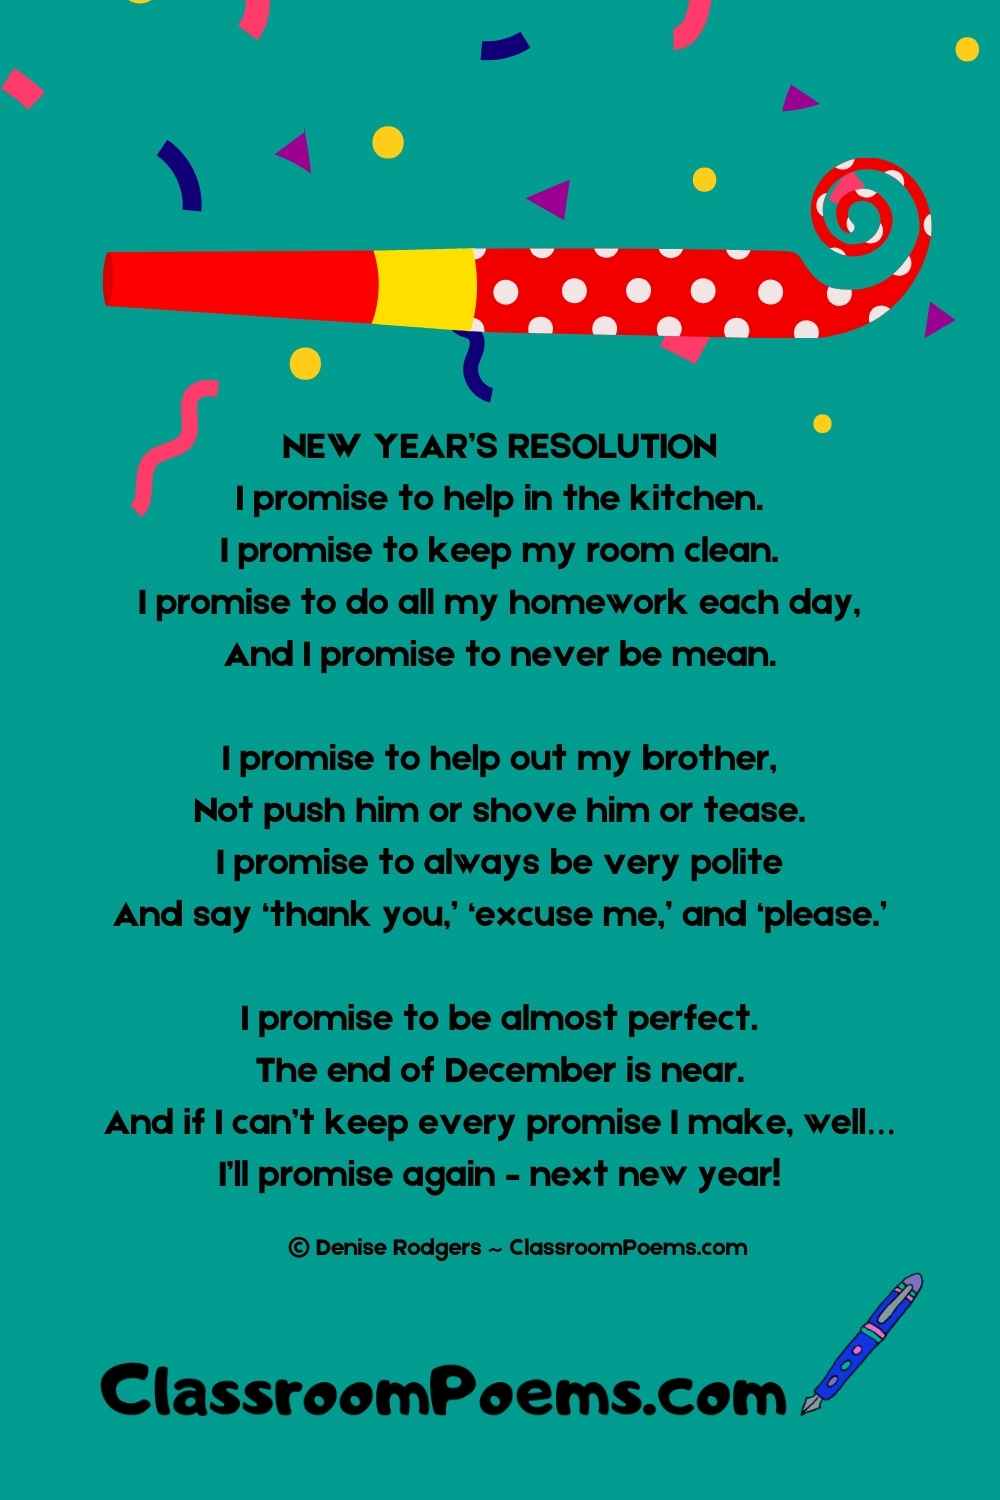 A New Year's Resolution poem by Denise Rodgers on ClassroomPoems.com.